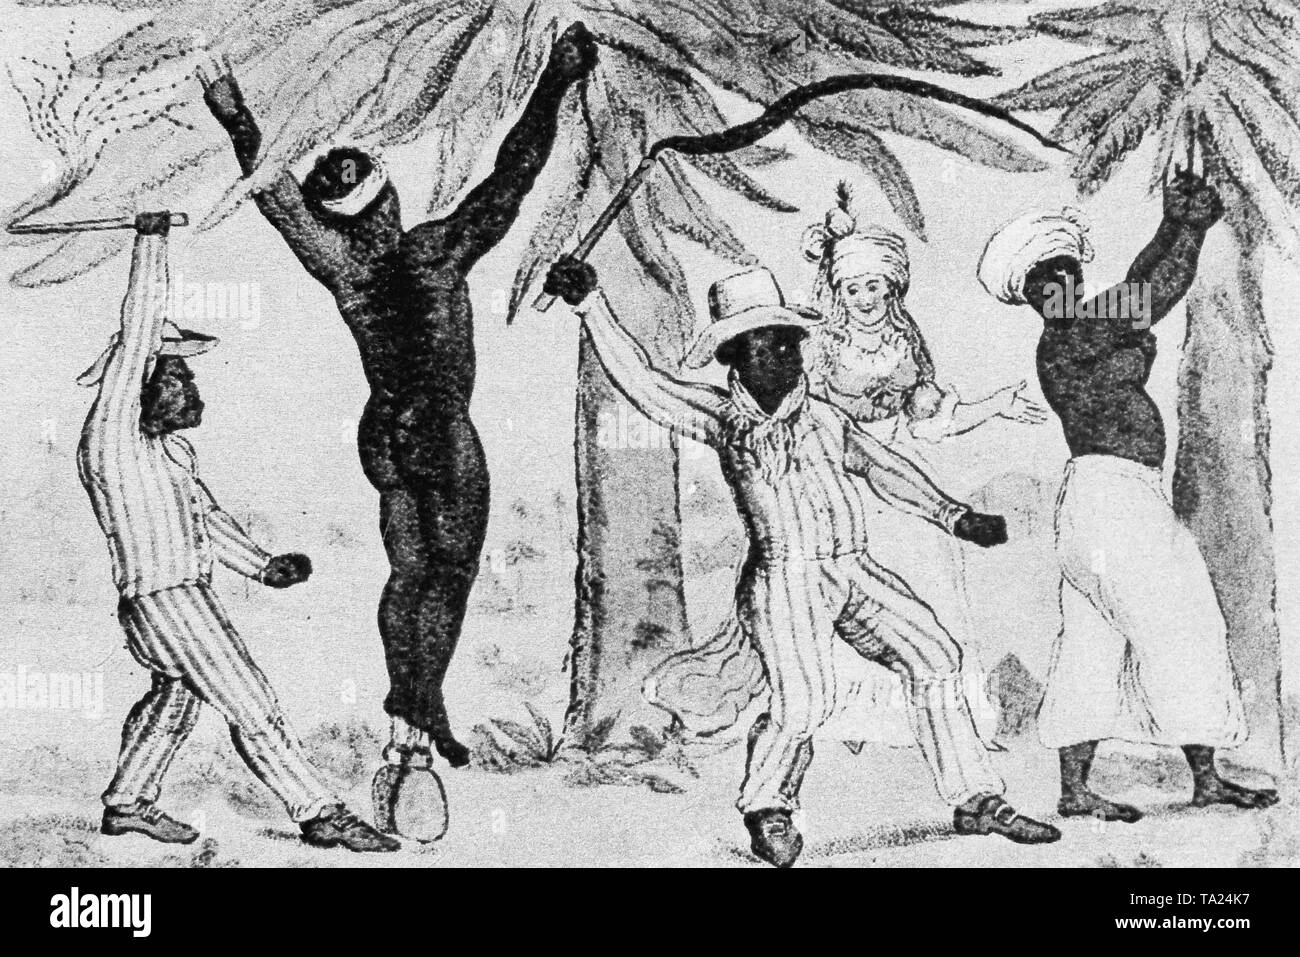 Whipping slaves Black and White Stock Photos & Images - Alamy